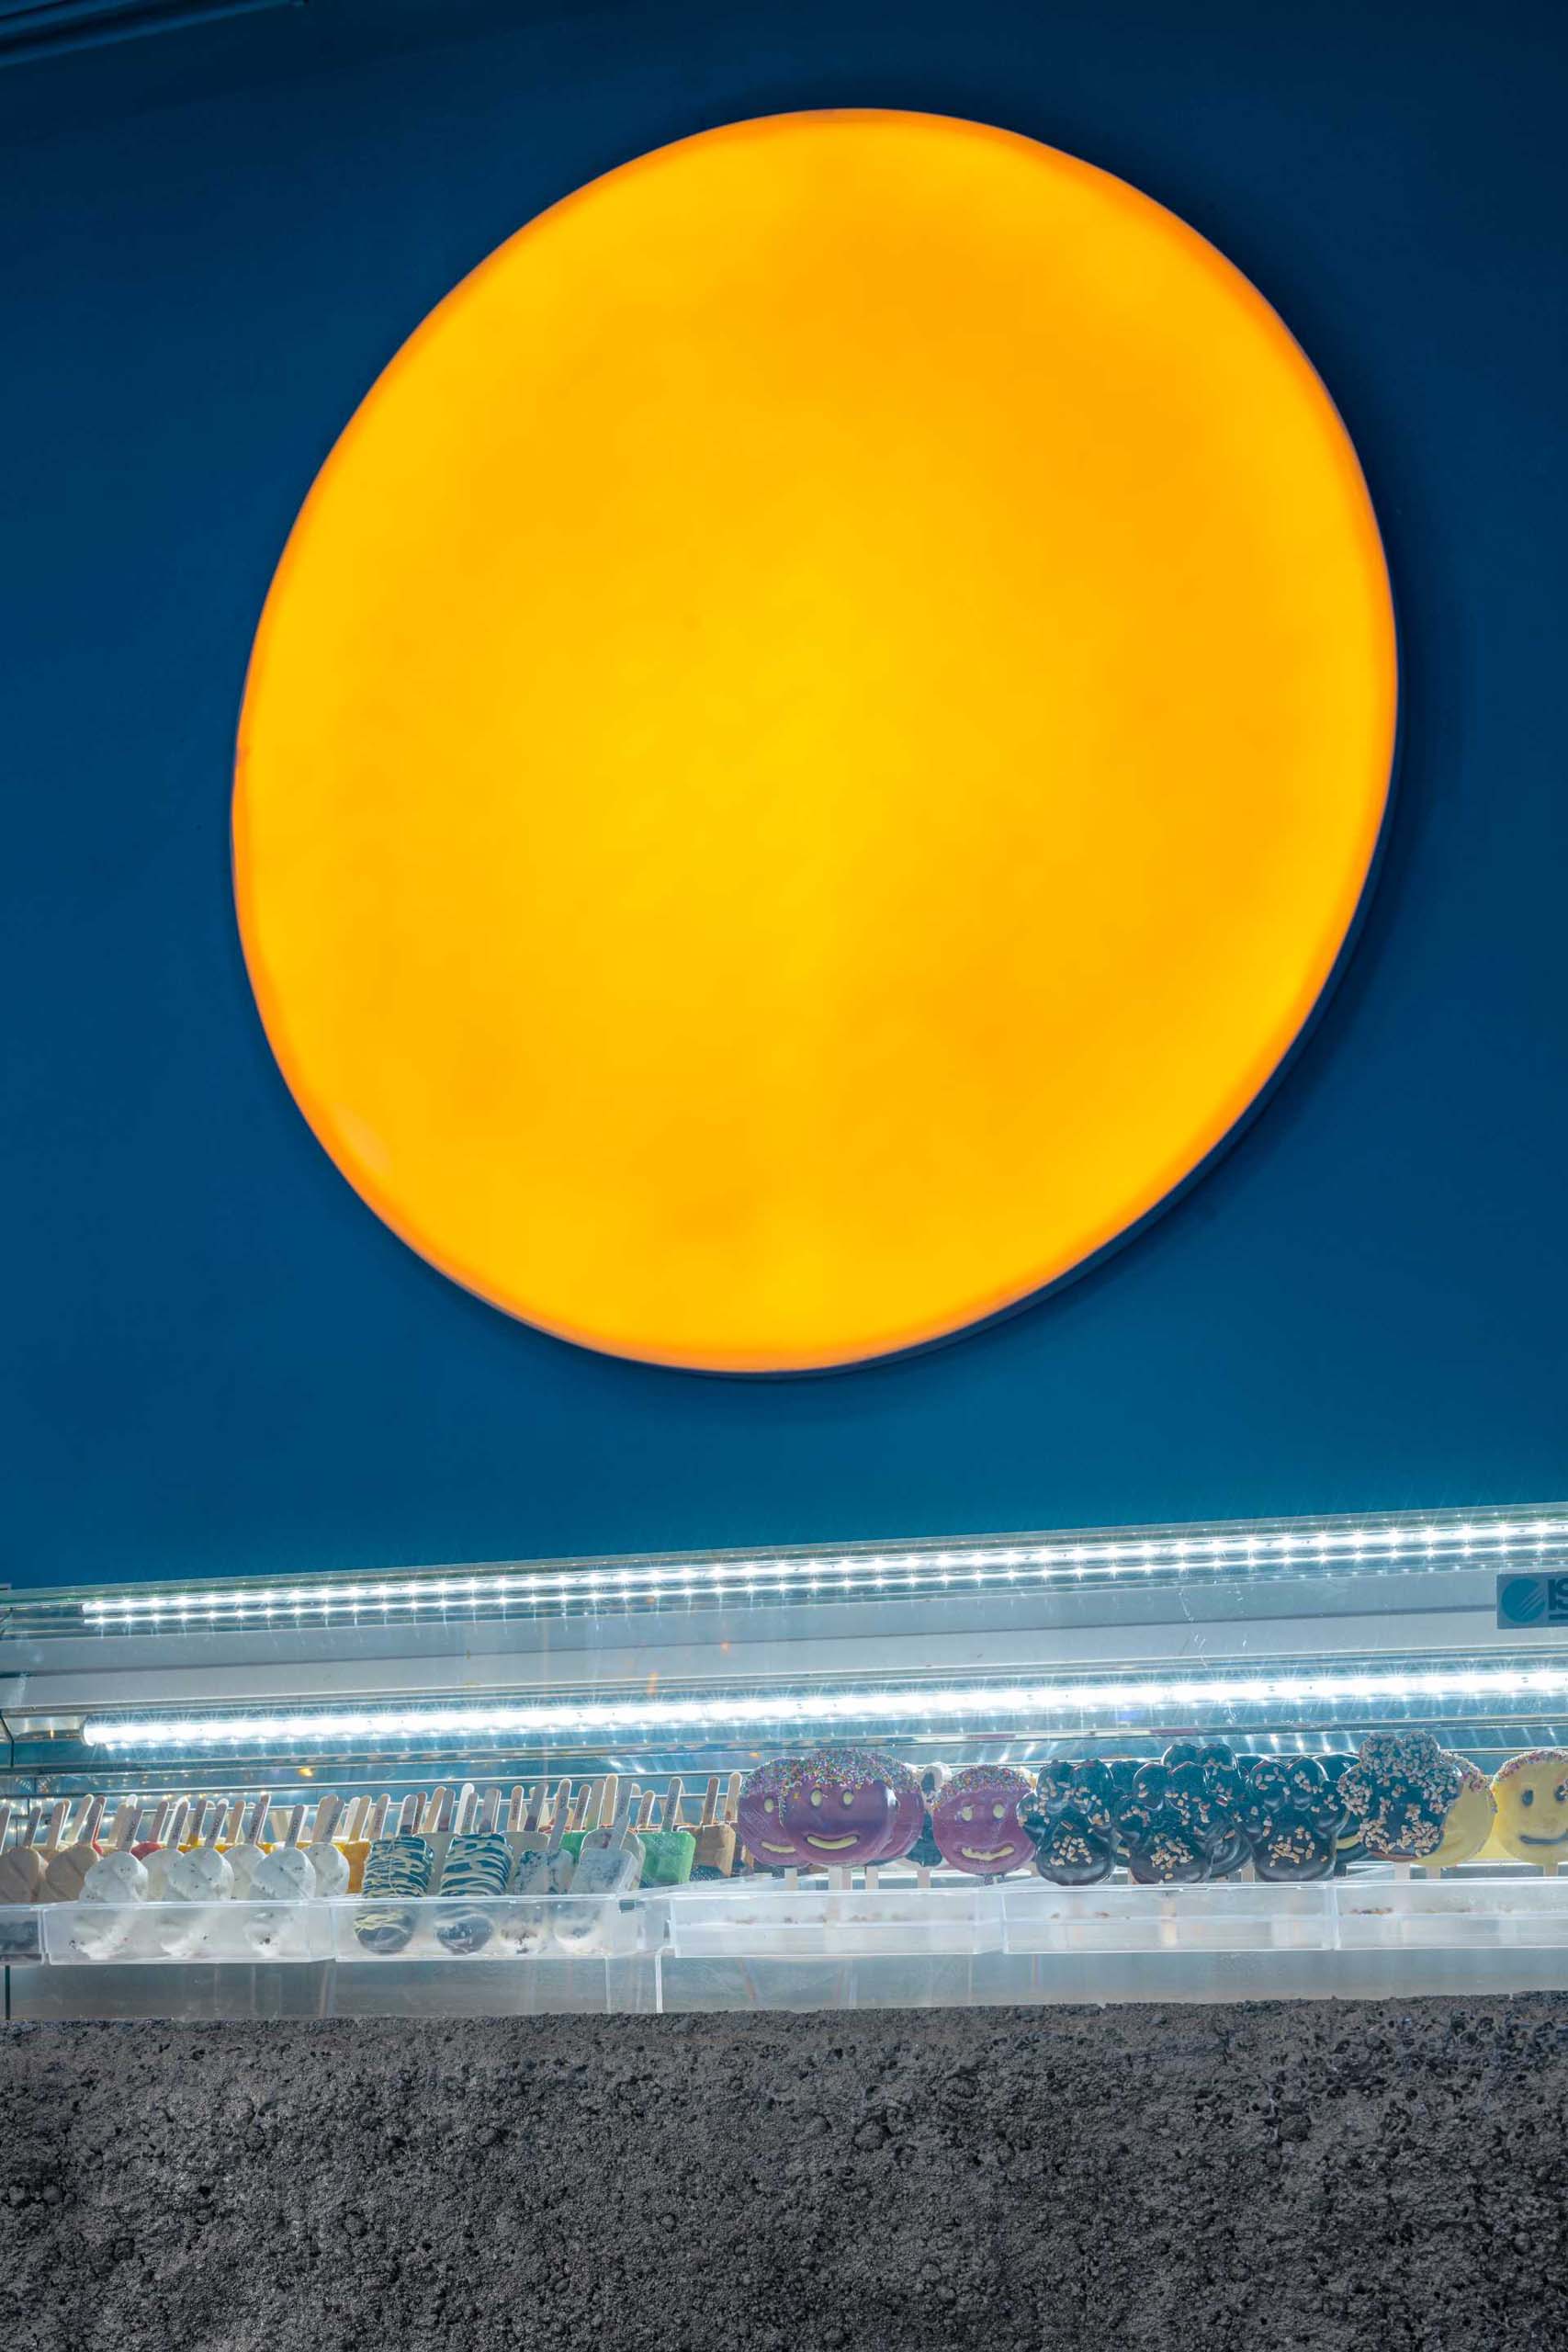 A large round light with an orange glow is a bright accent to the all-blue wall.